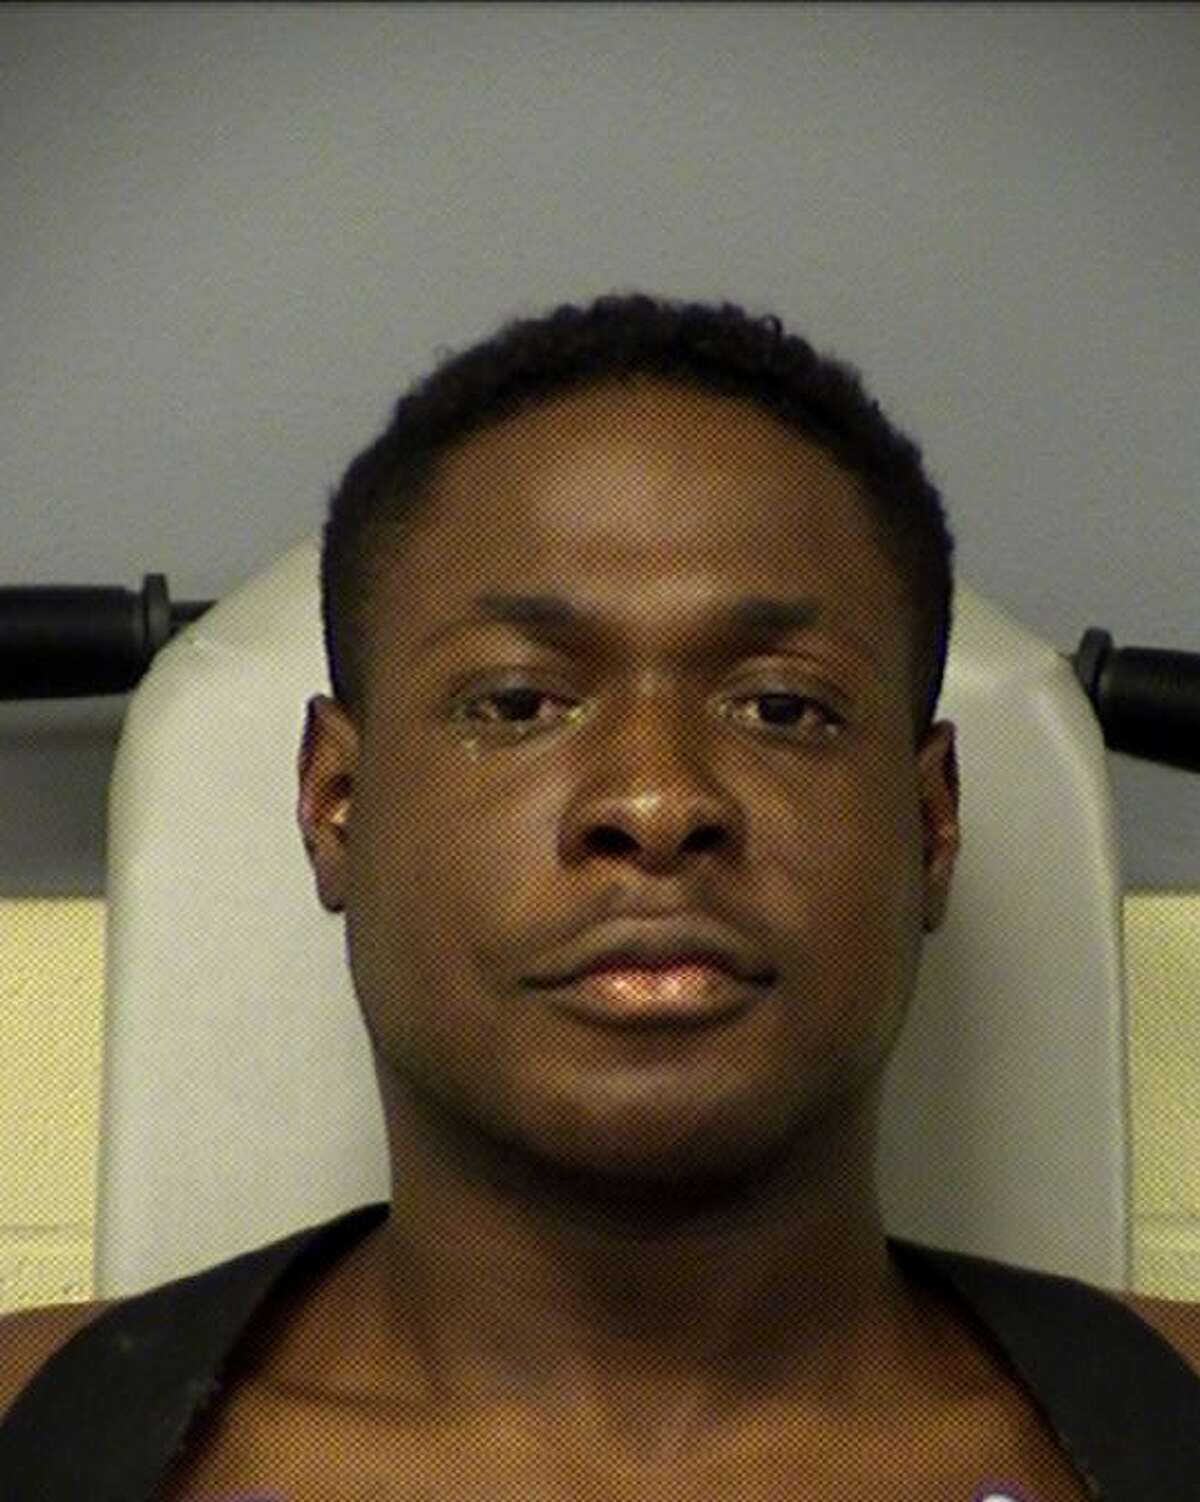 Michael Ify Egwuagu, 25, has been charged with murder in the fatal stabbing of his sister, according to the Travis County Sheriff's Office.